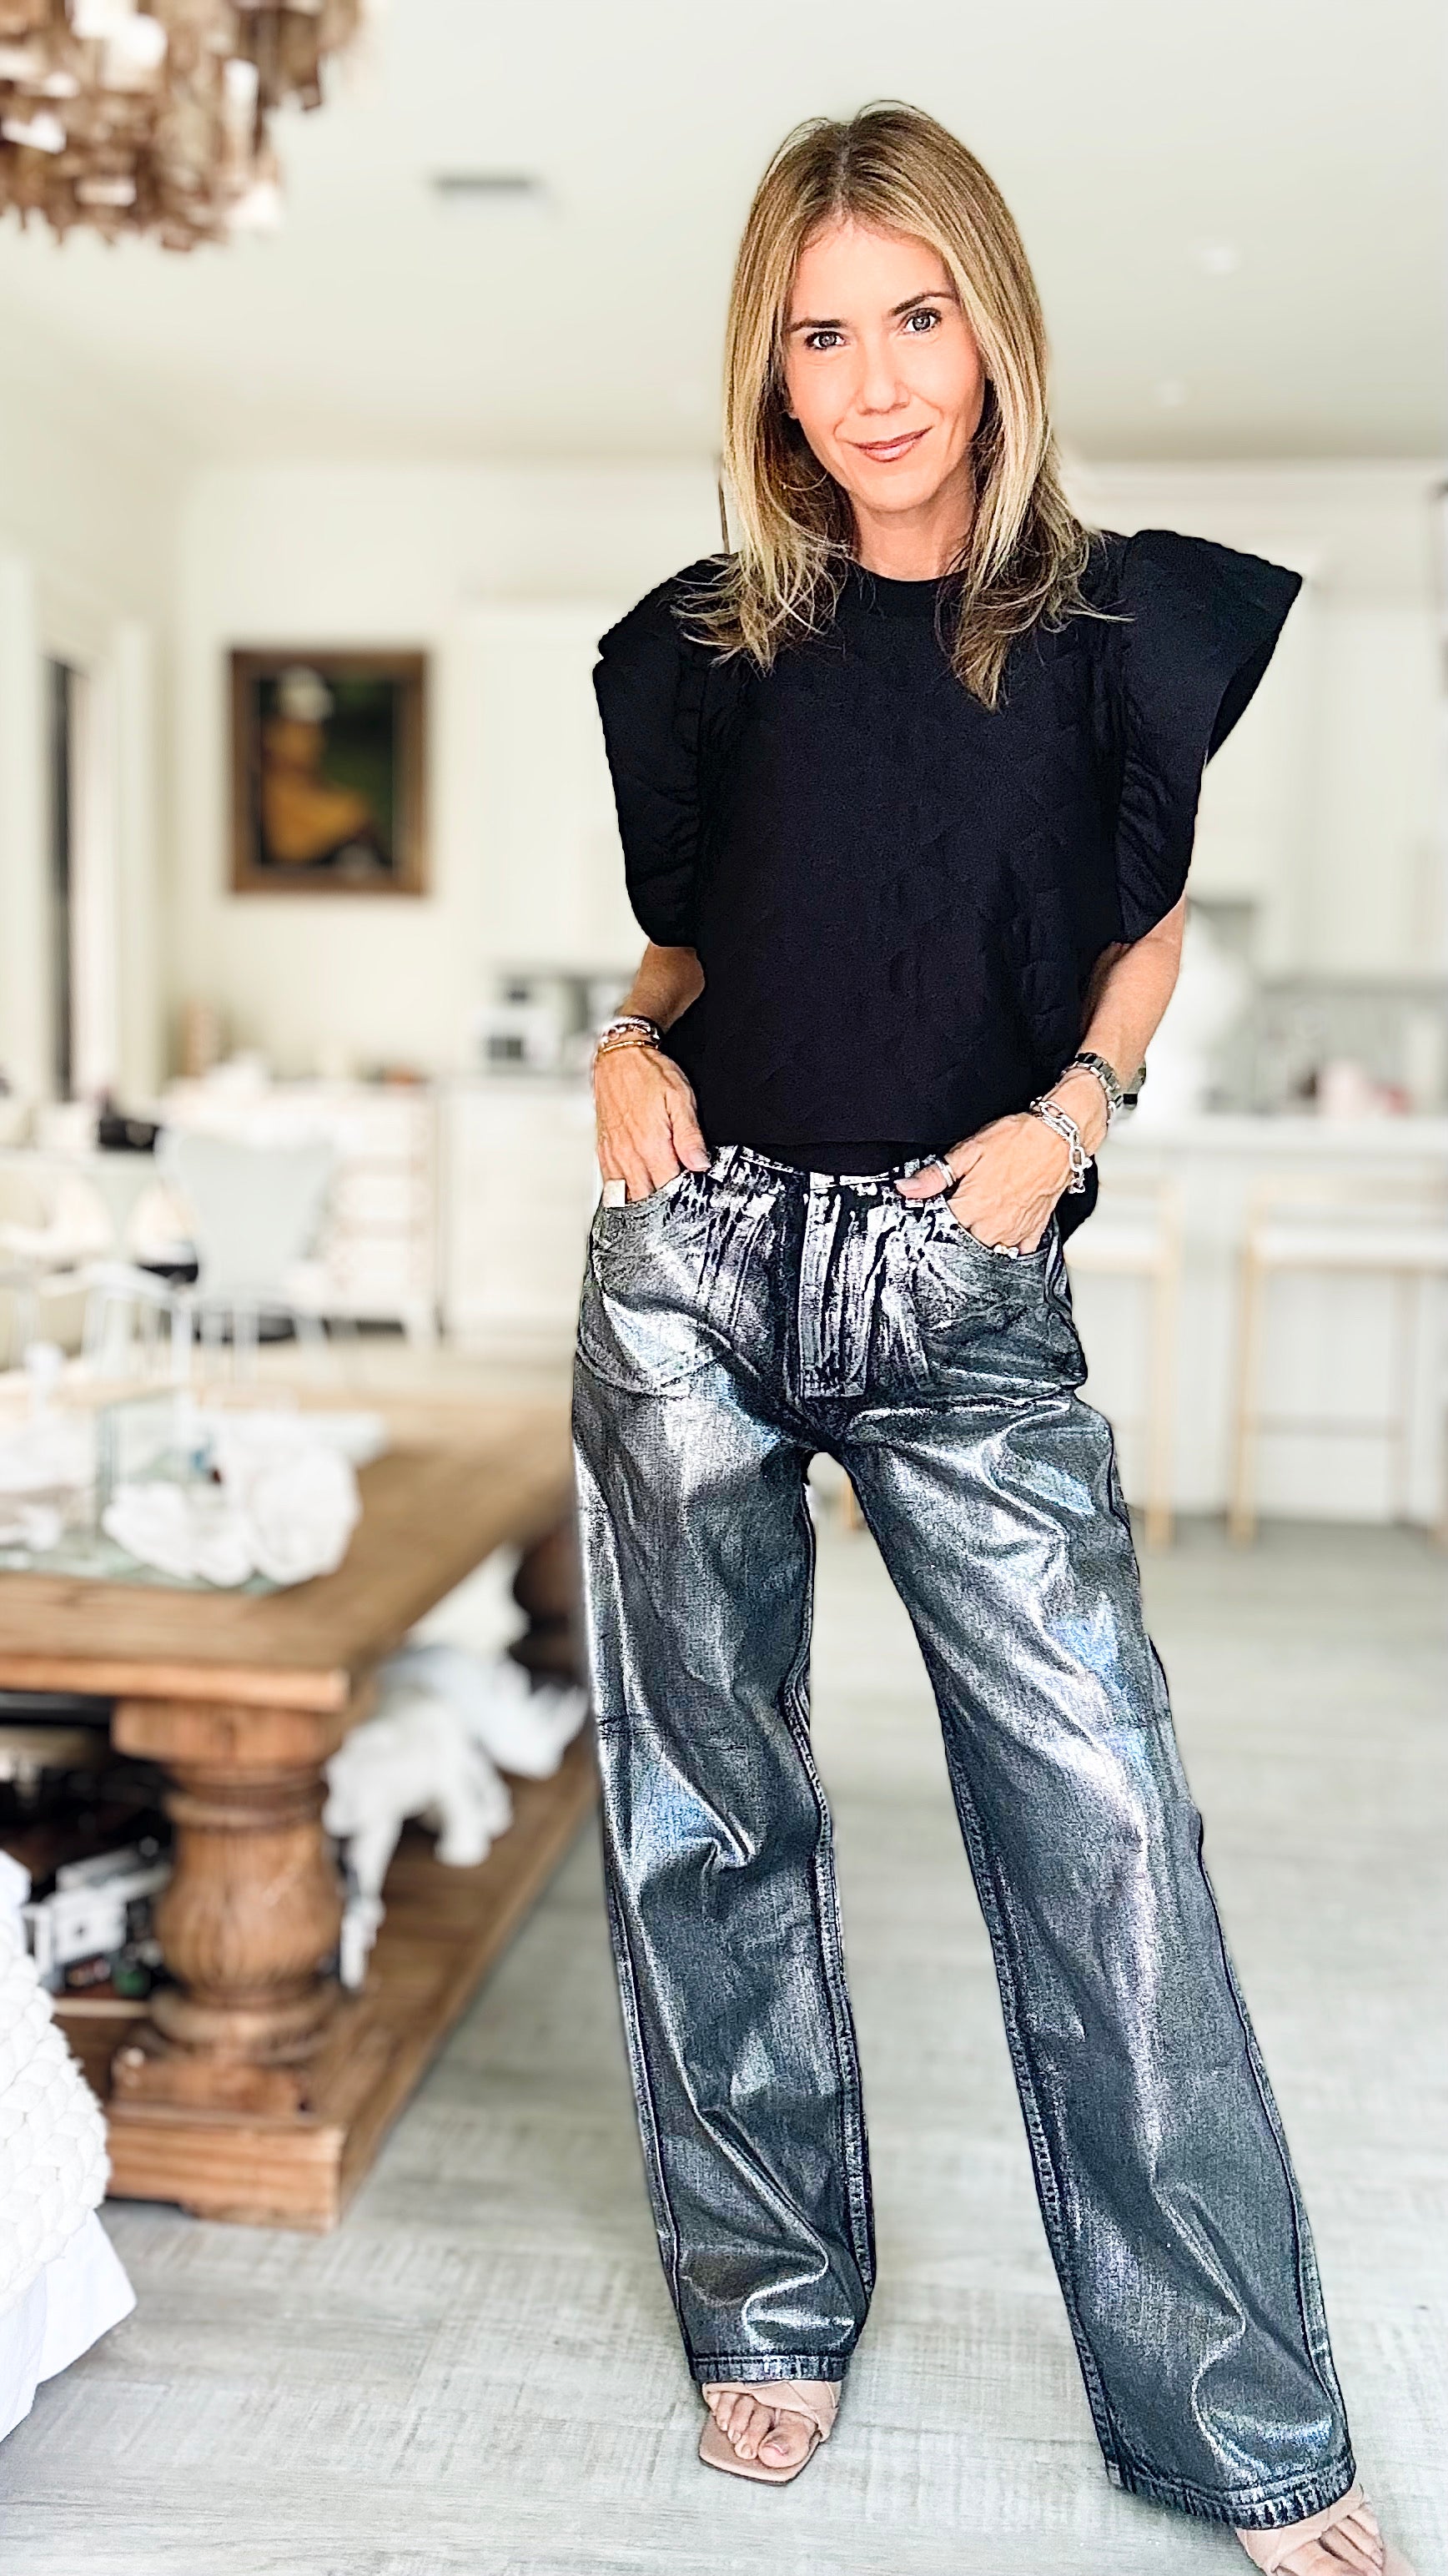 Blackout Metallic Jean - Black/Silver-170 Bottoms-MISS LOVE-Coastal Bloom Boutique, find the trendiest versions of the popular styles and looks Located in Indialantic, FL